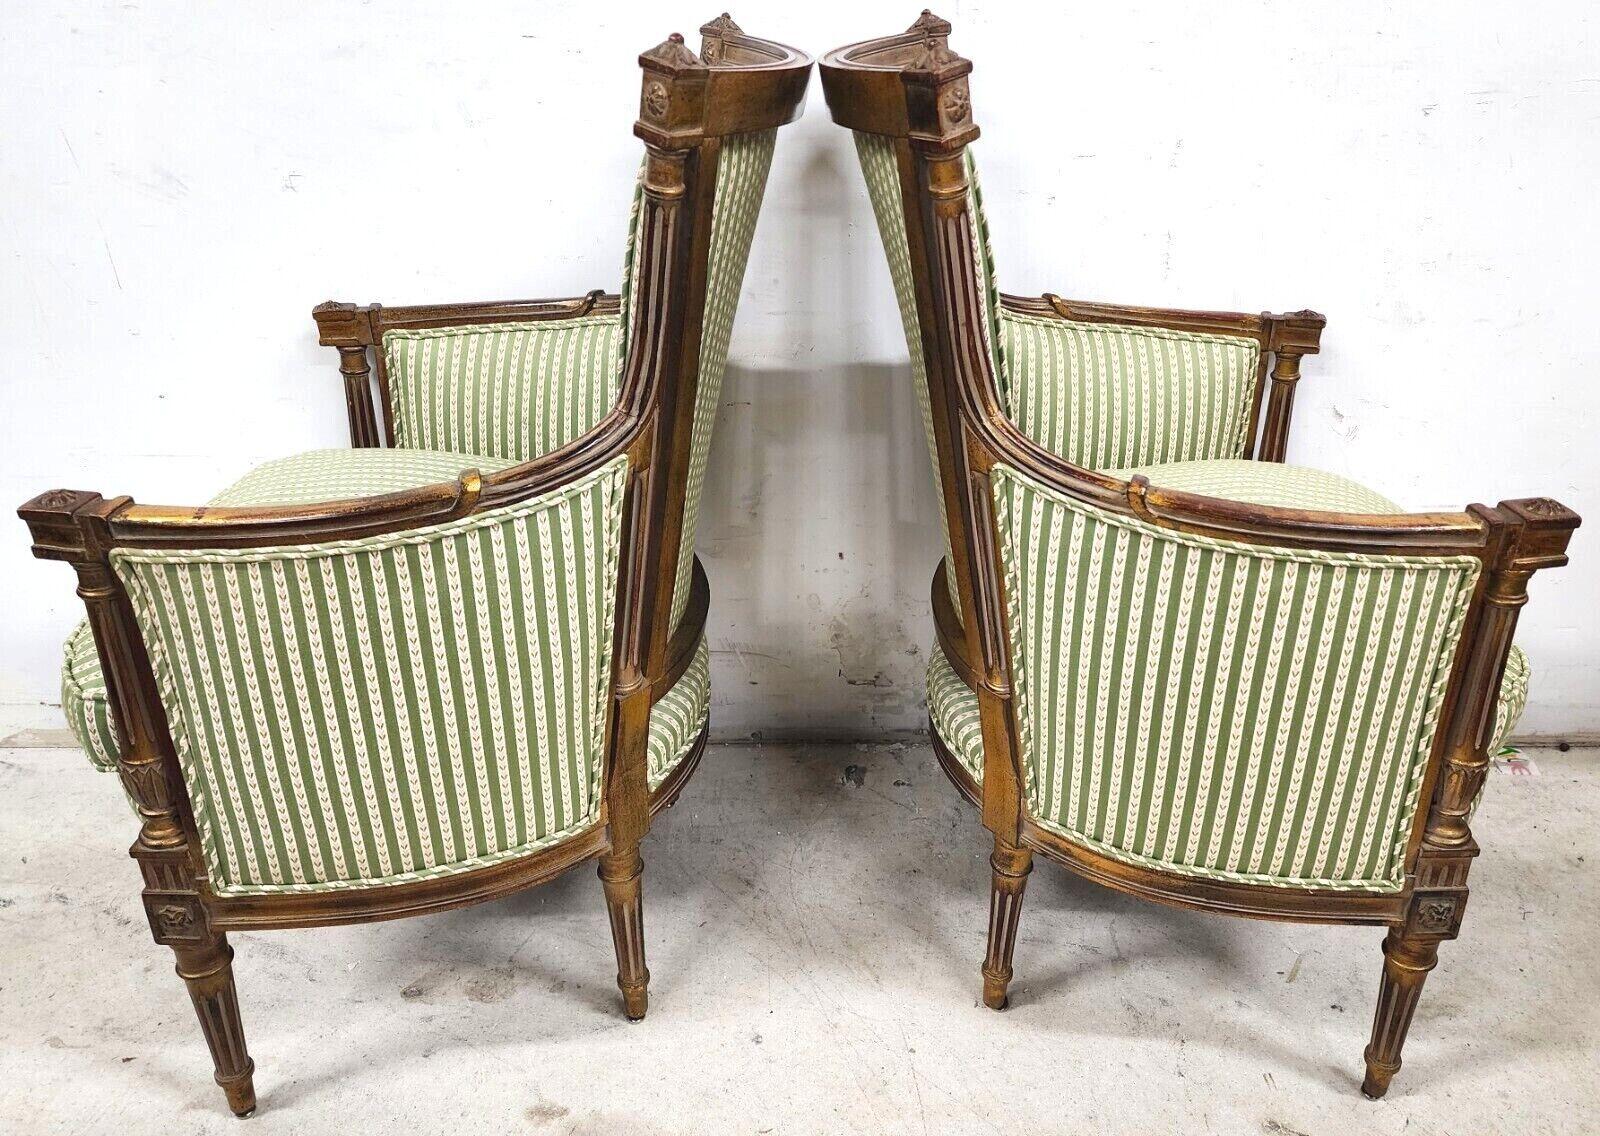 20th Century French Louis XVI Style Giltwood Bergère Chairs - Set of 2 For Sale